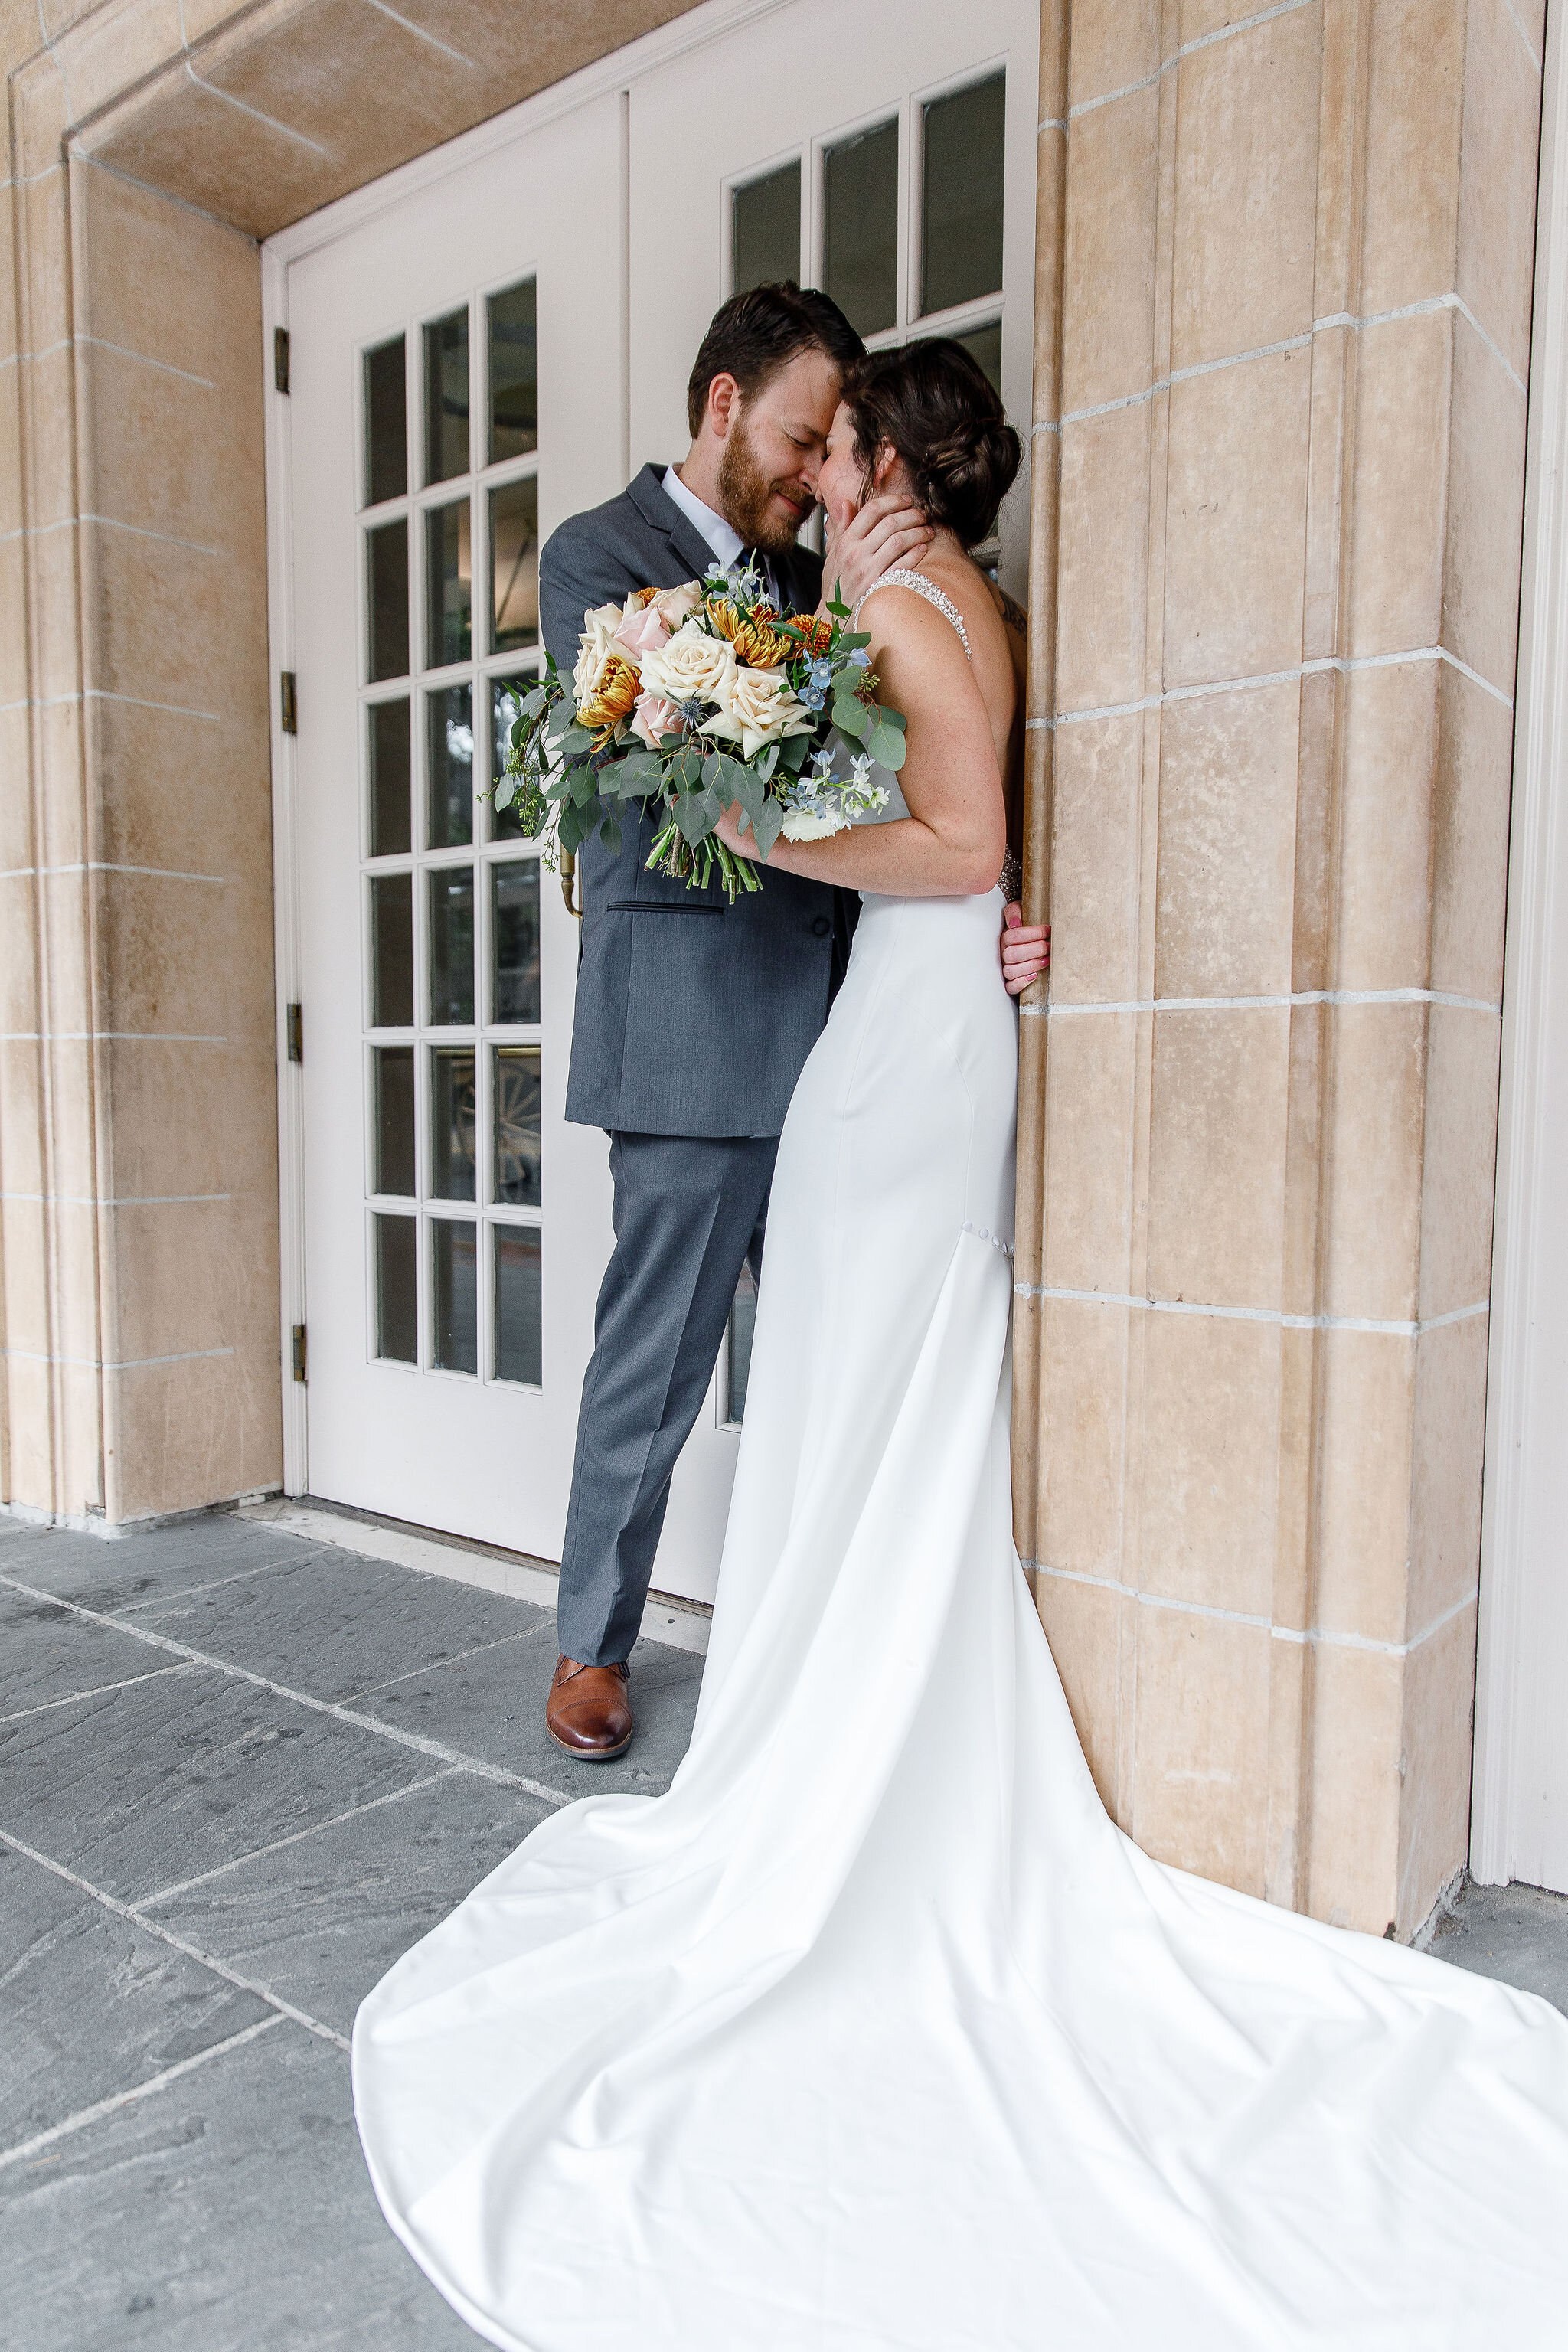 ivory-and-beau-blog-couple-and-florals-shannon-and-mike-wedding-savannah-wedding-planner-savannah-florist-savannah-wedding-southern-florist-southern-wedding-alida-hotel-118.jpg